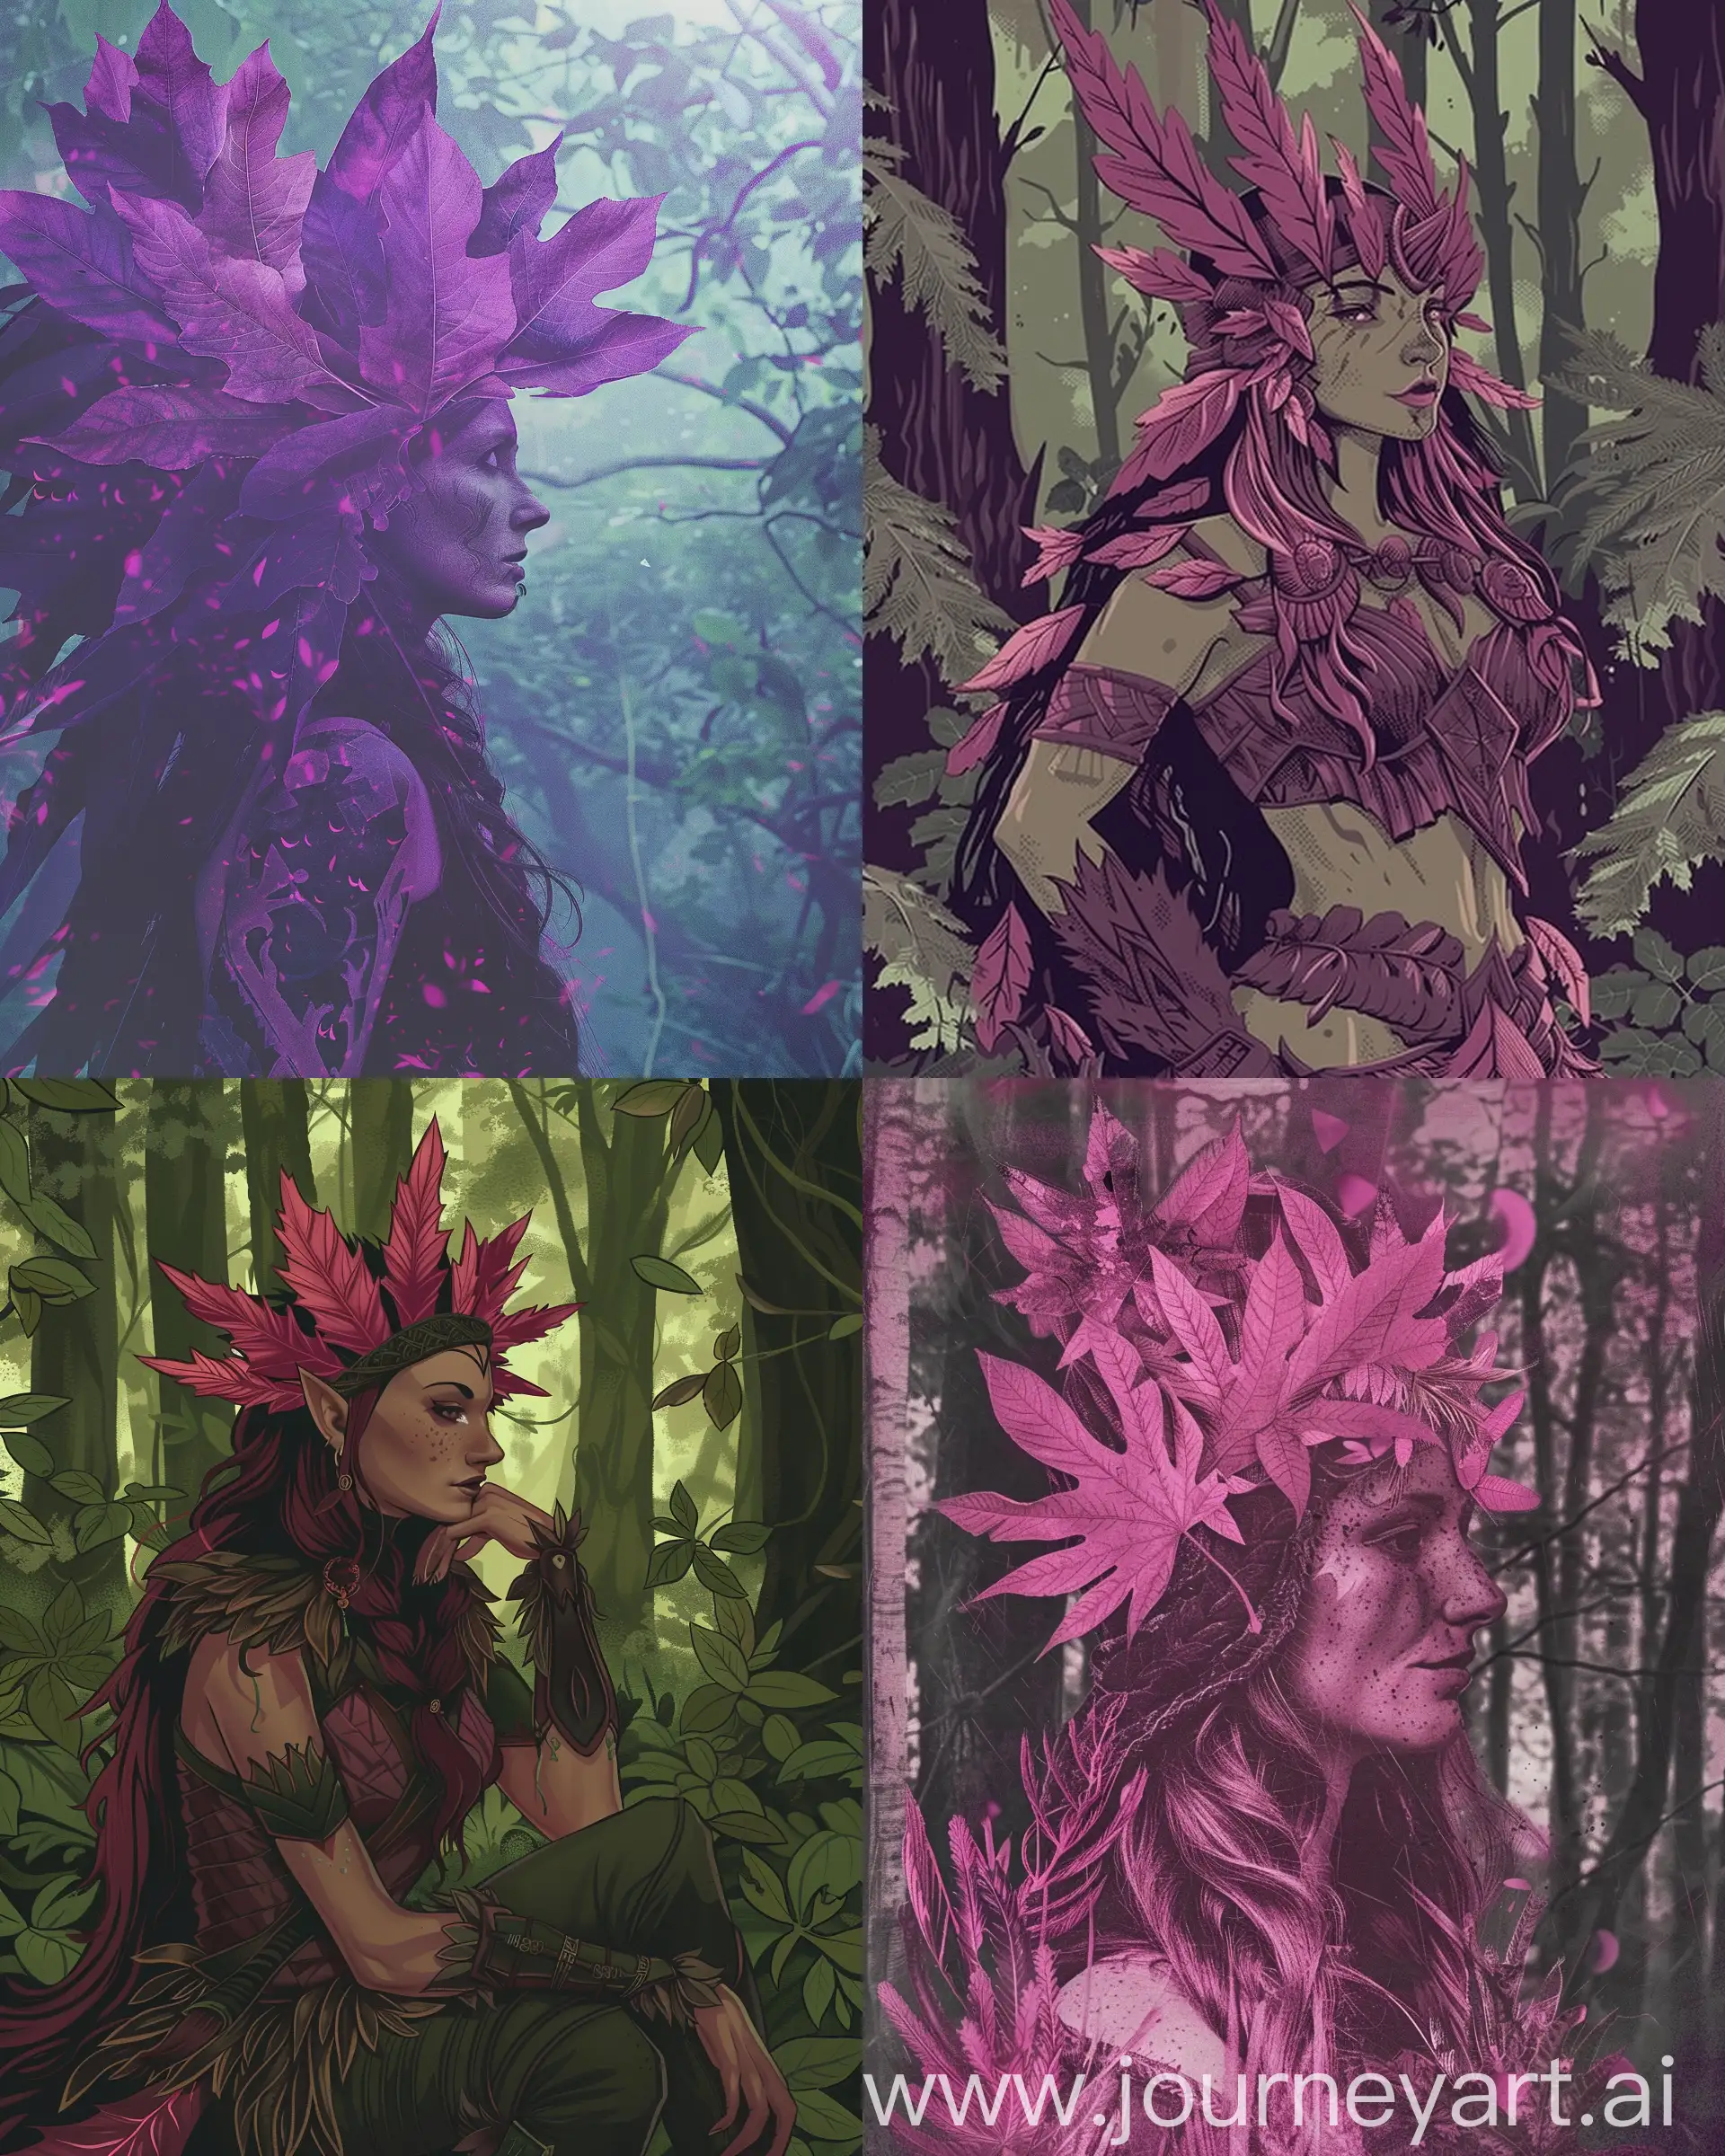 Enchanting-Druid-Woman-with-Magenta-Leaf-Crown-in-Forest